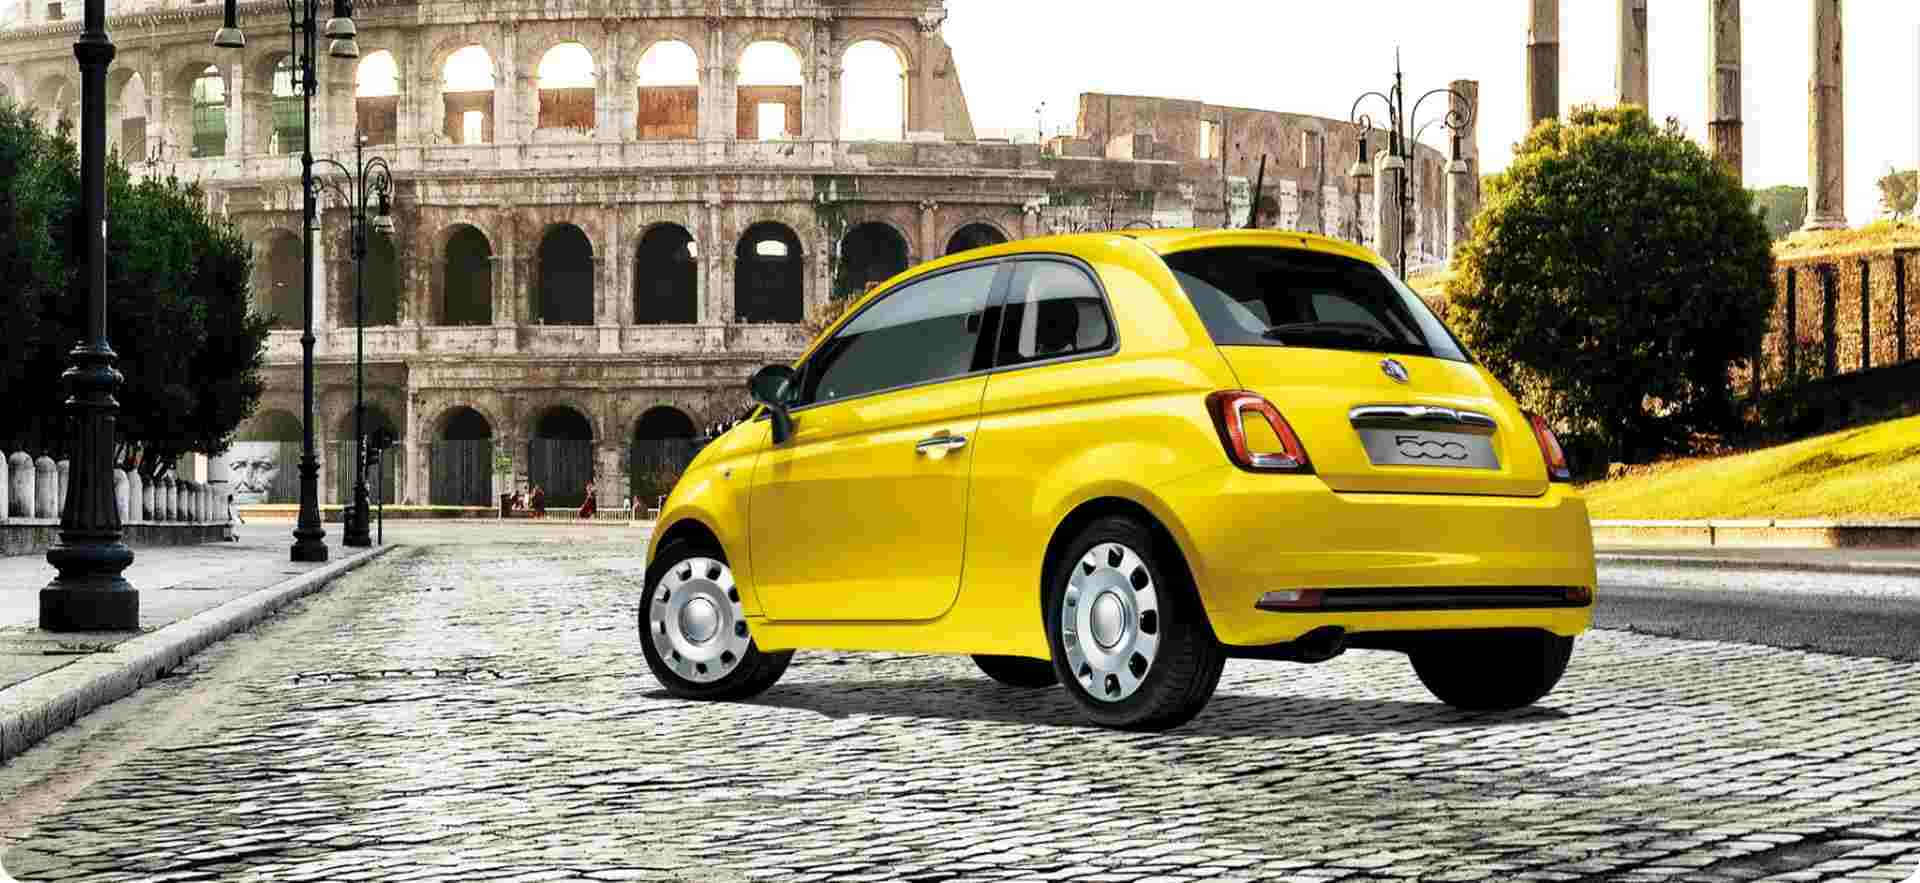 Classic Fiat 500 in a picturesque setting Wallpaper